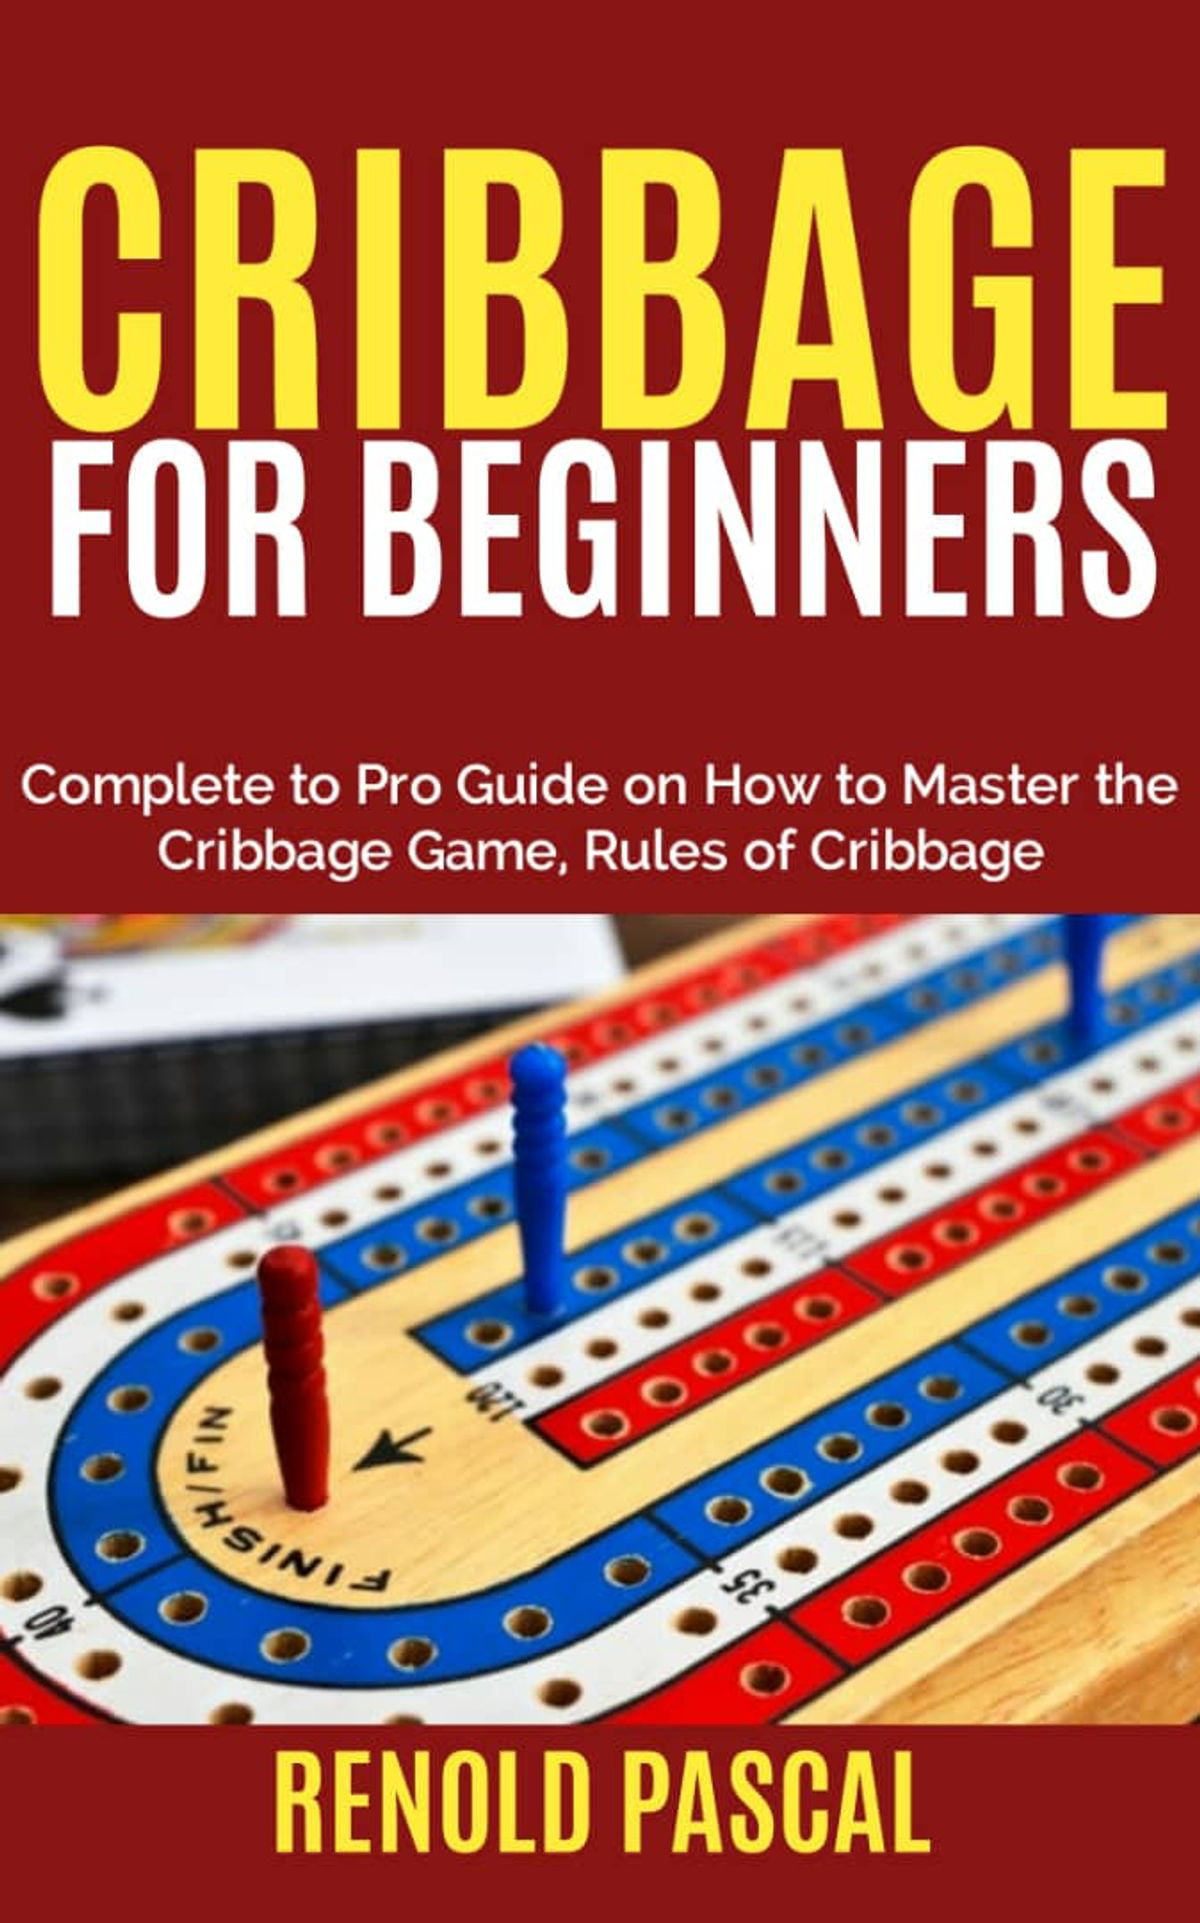 book on how to play cribbage